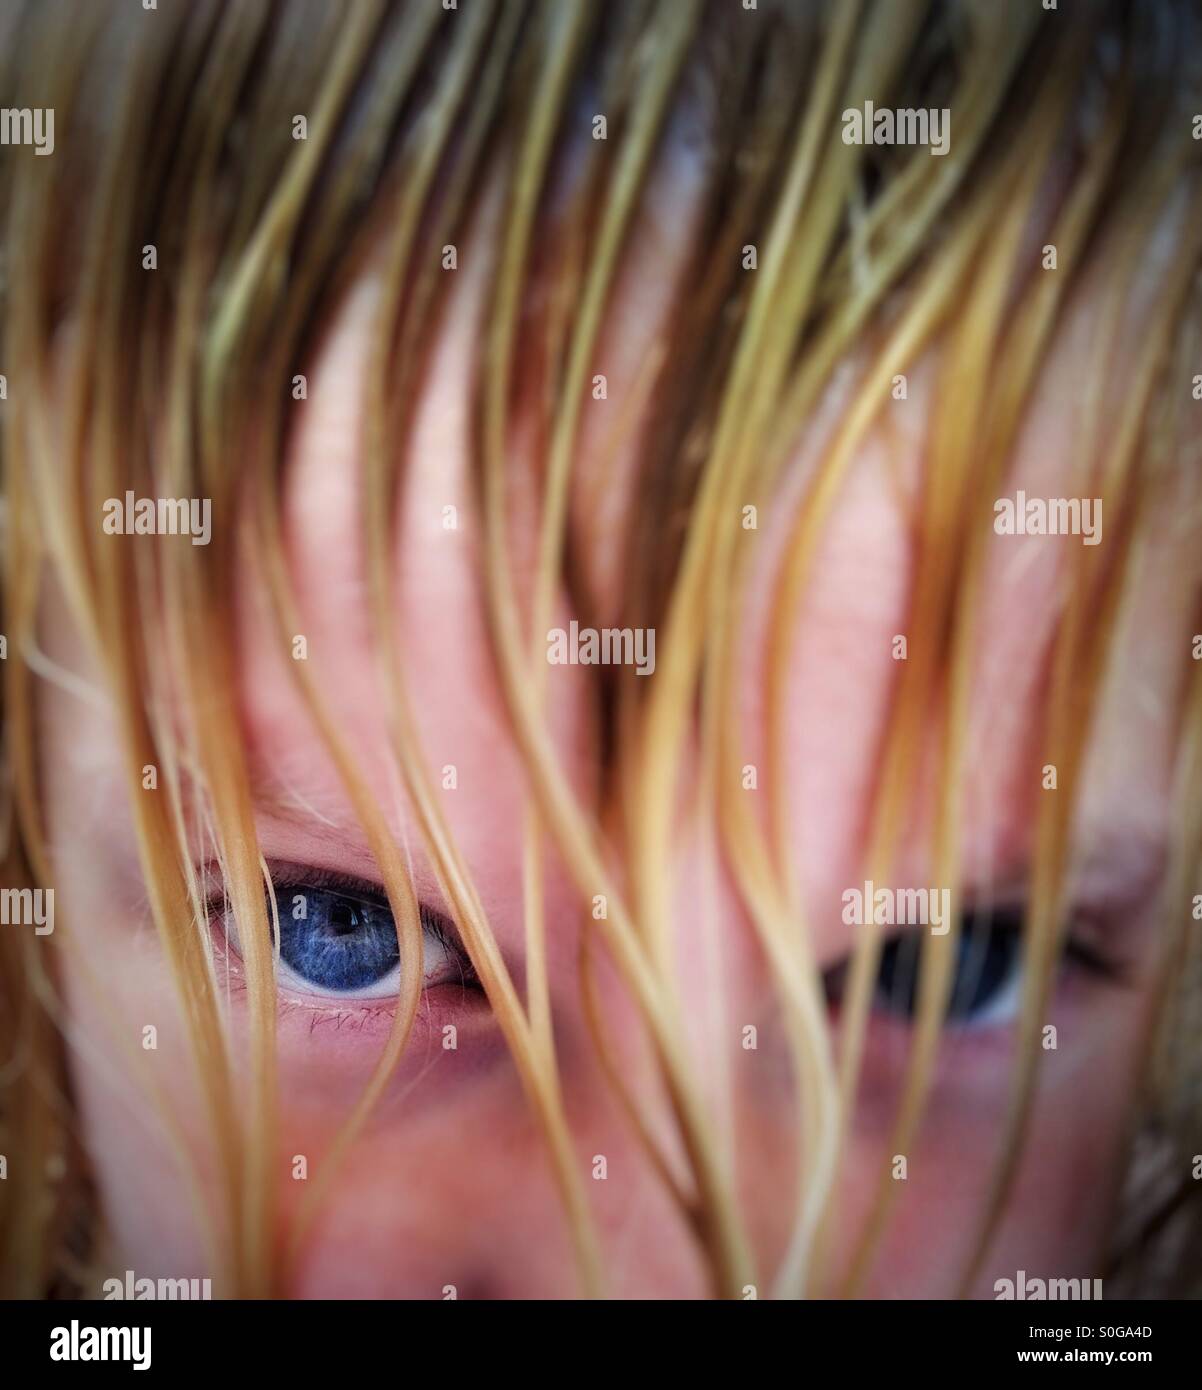 Girl with blue eyes peering out from behind curtain of wet blond hair Stock Photo